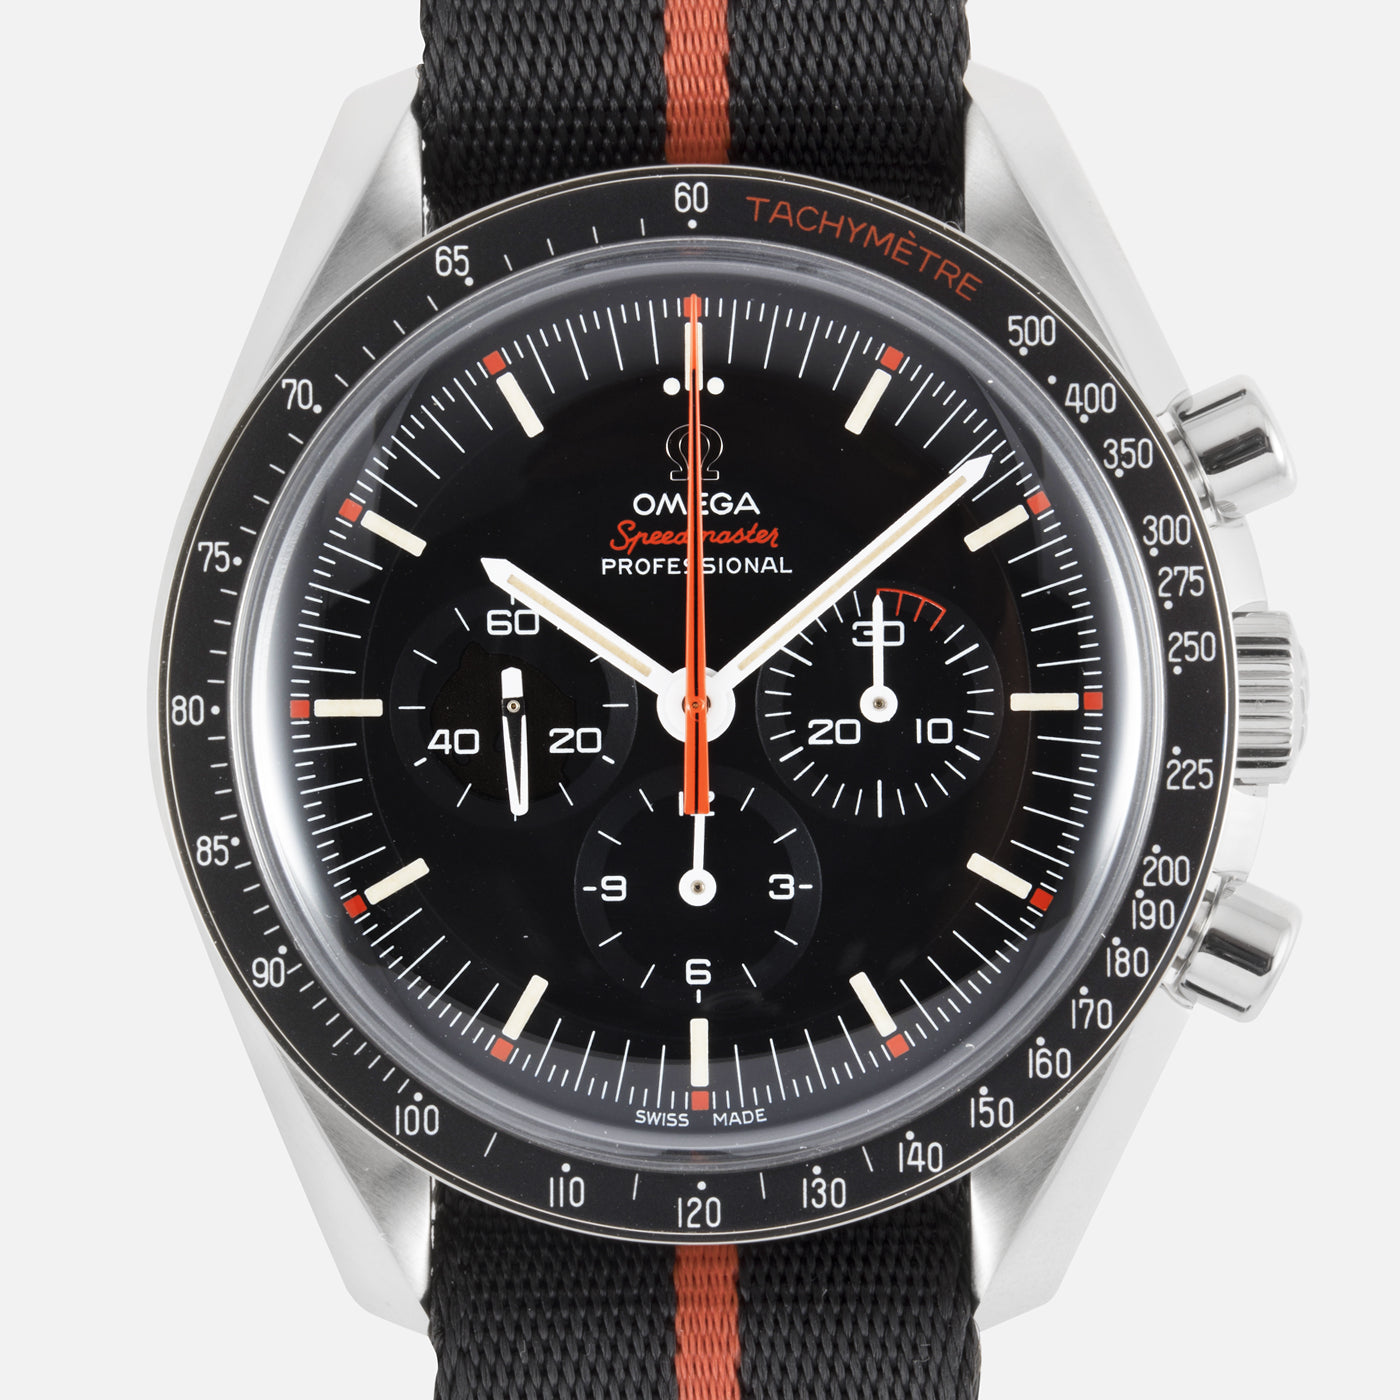 Omega Speedmaster Speedy Tuesday Ultraman Watch | S.Song Vintage Timepieces – S.Song Watches